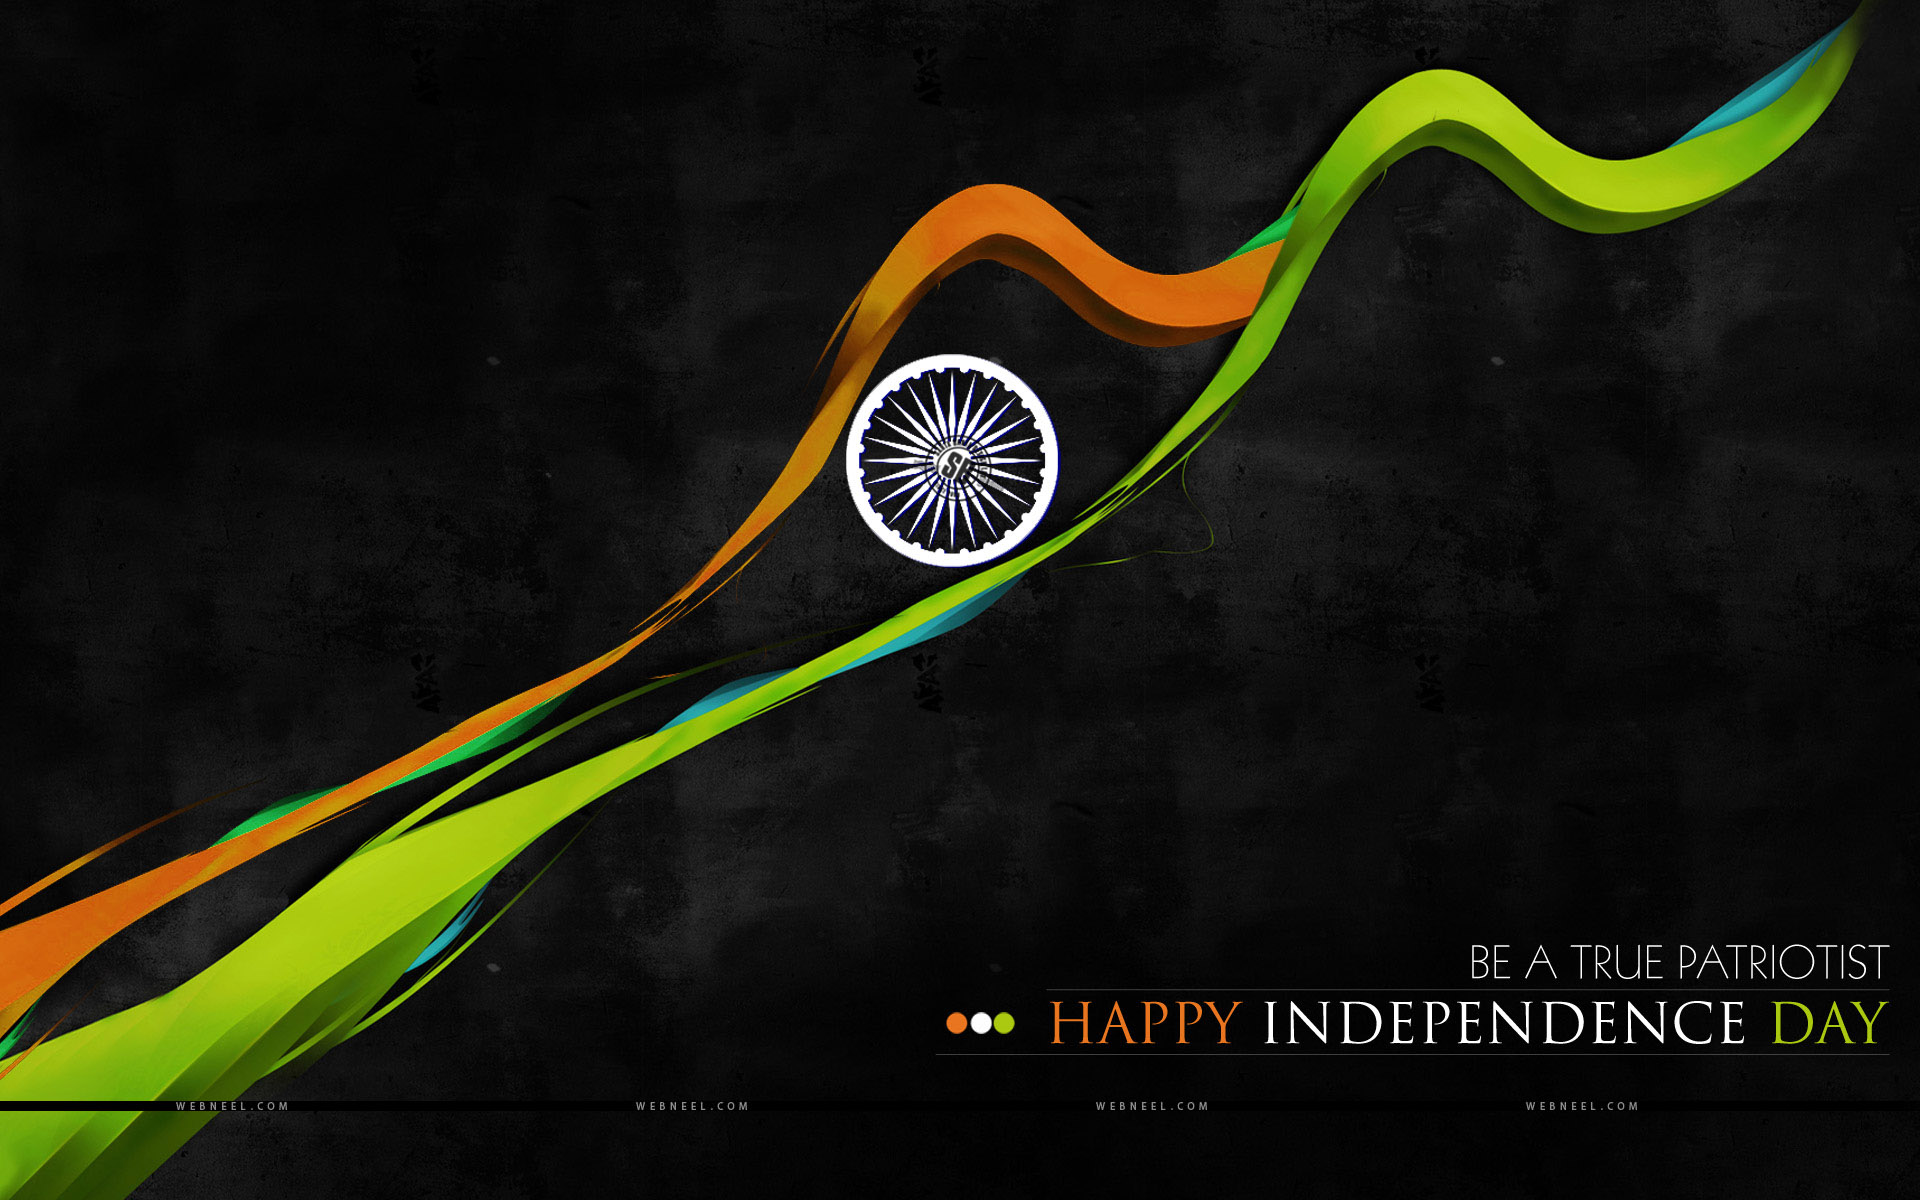 wallpapers independence india wallpaper greeting cards images